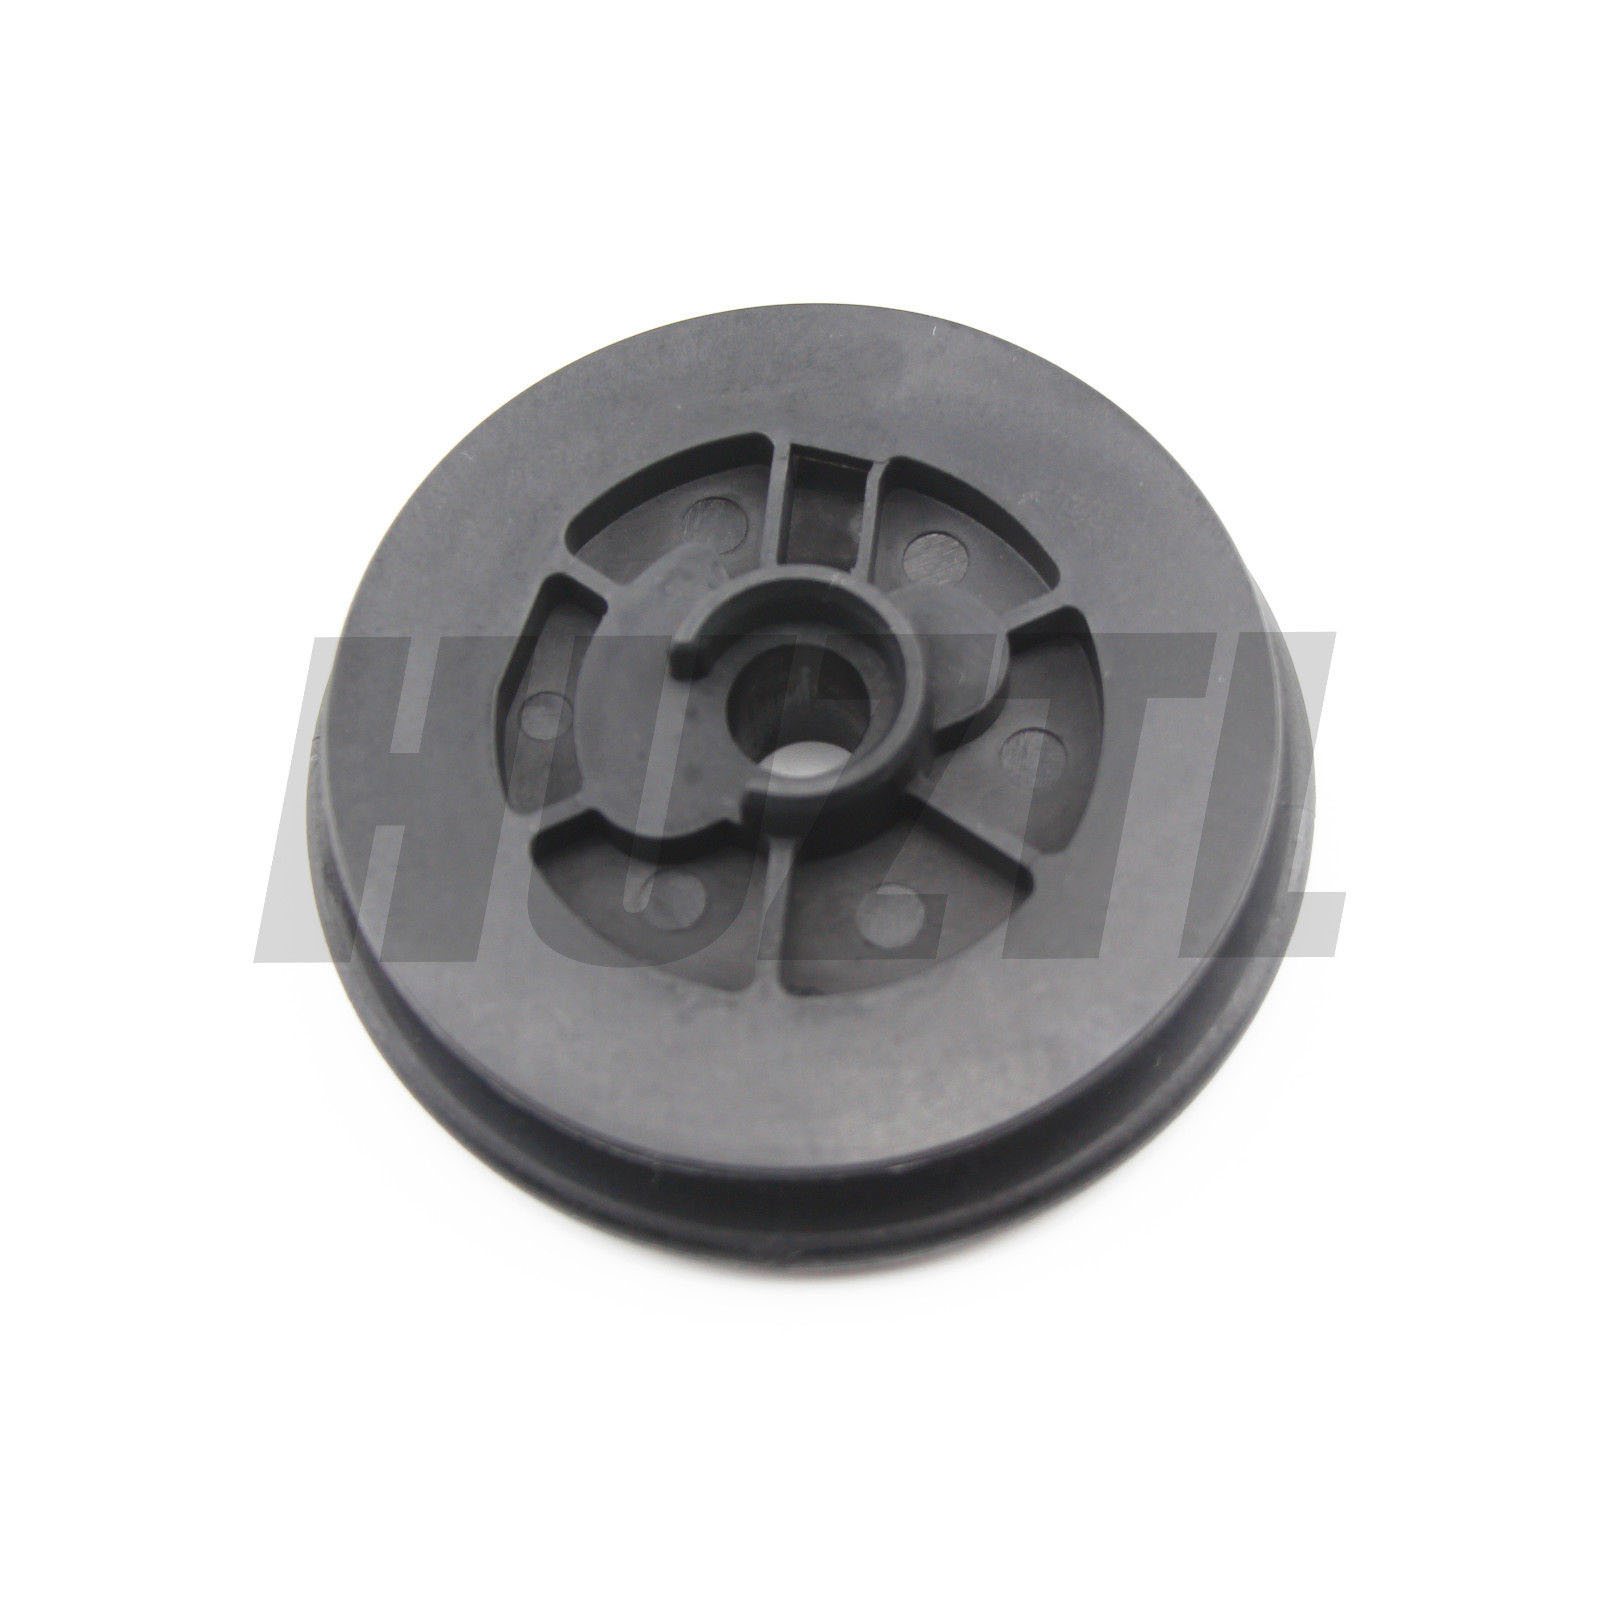 STARTER RECOIL PULLEY FITS STIHL TS410 TS420 REPLACES 4223-190-1001 OEM PART 